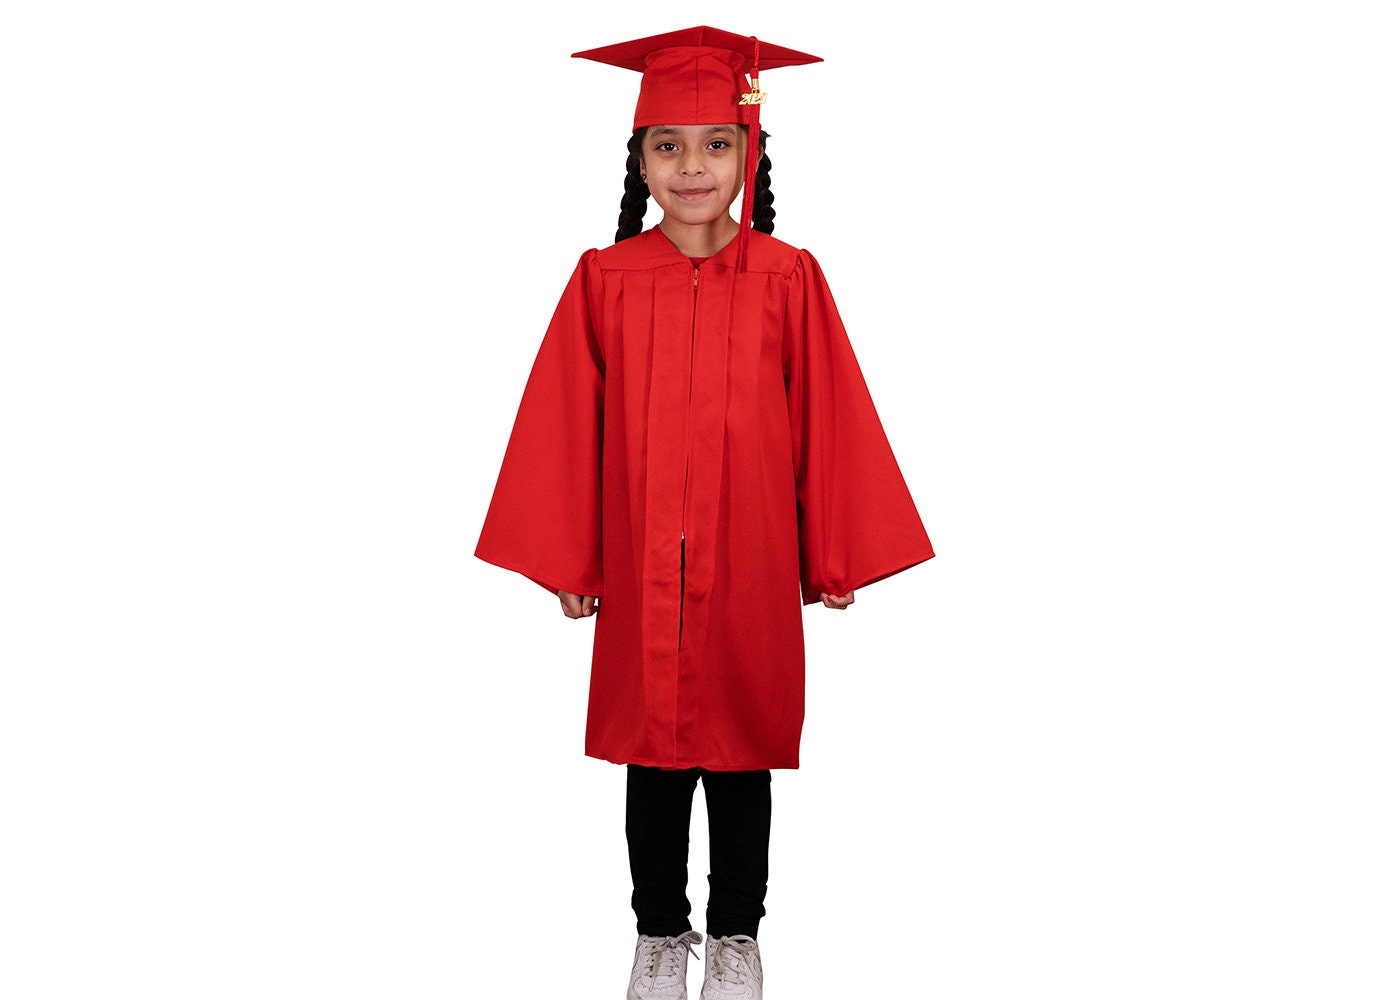 Imported Black Kids Graduation Gown And Cap, Size: Universal